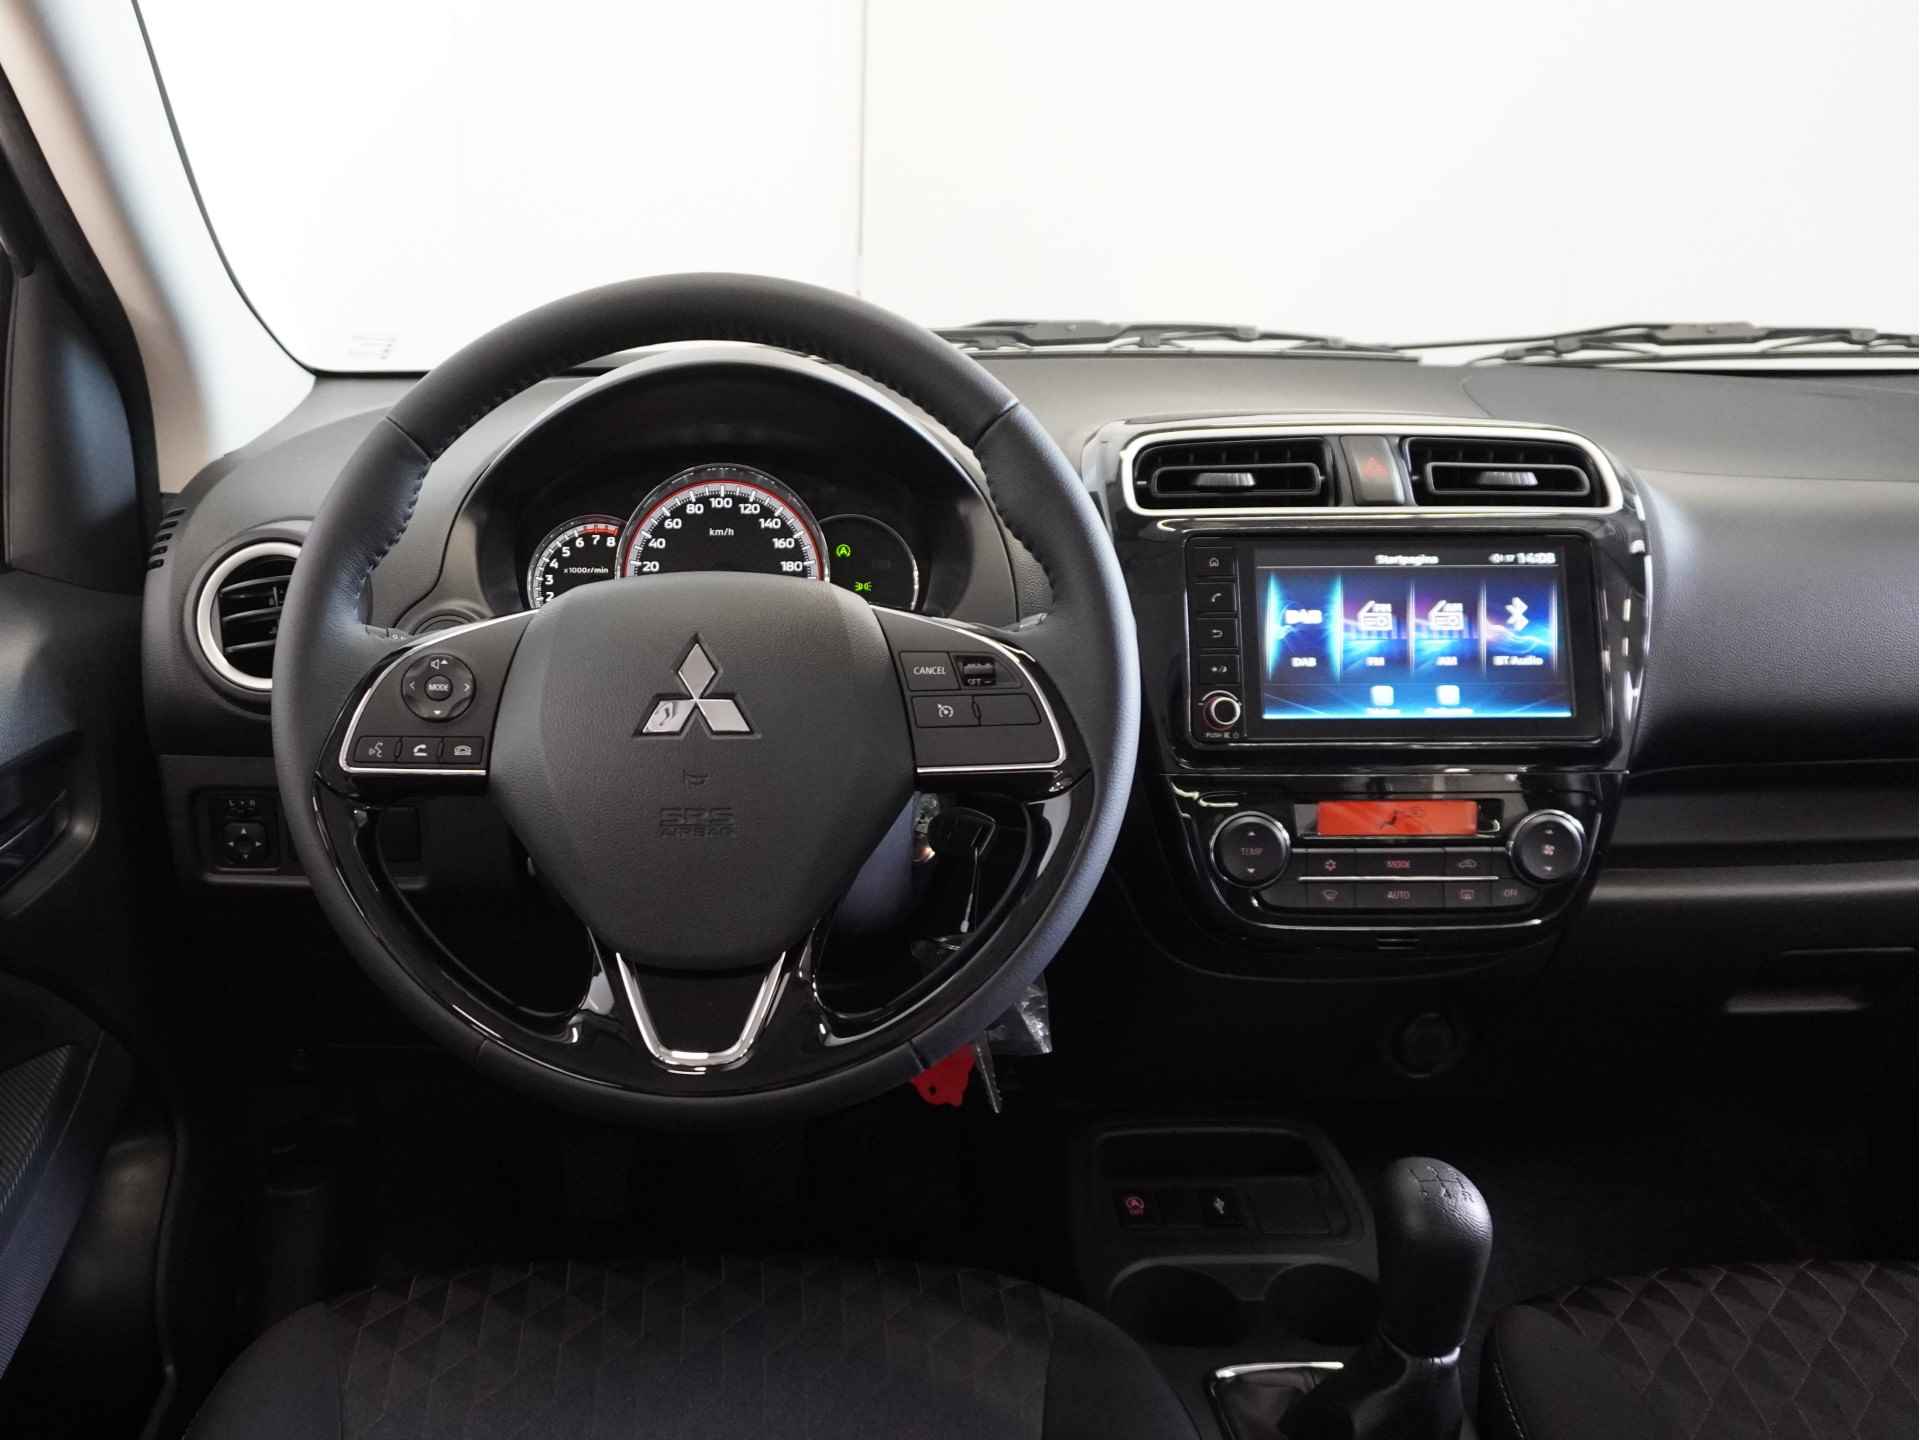 Mitsubishi Space Star 1.2 Dynamic | Achteruitrijcamera | Uit voorraad leverbaar | Apple Carplay / Androi Auto | Private lease € 349 per maand | - 13/26